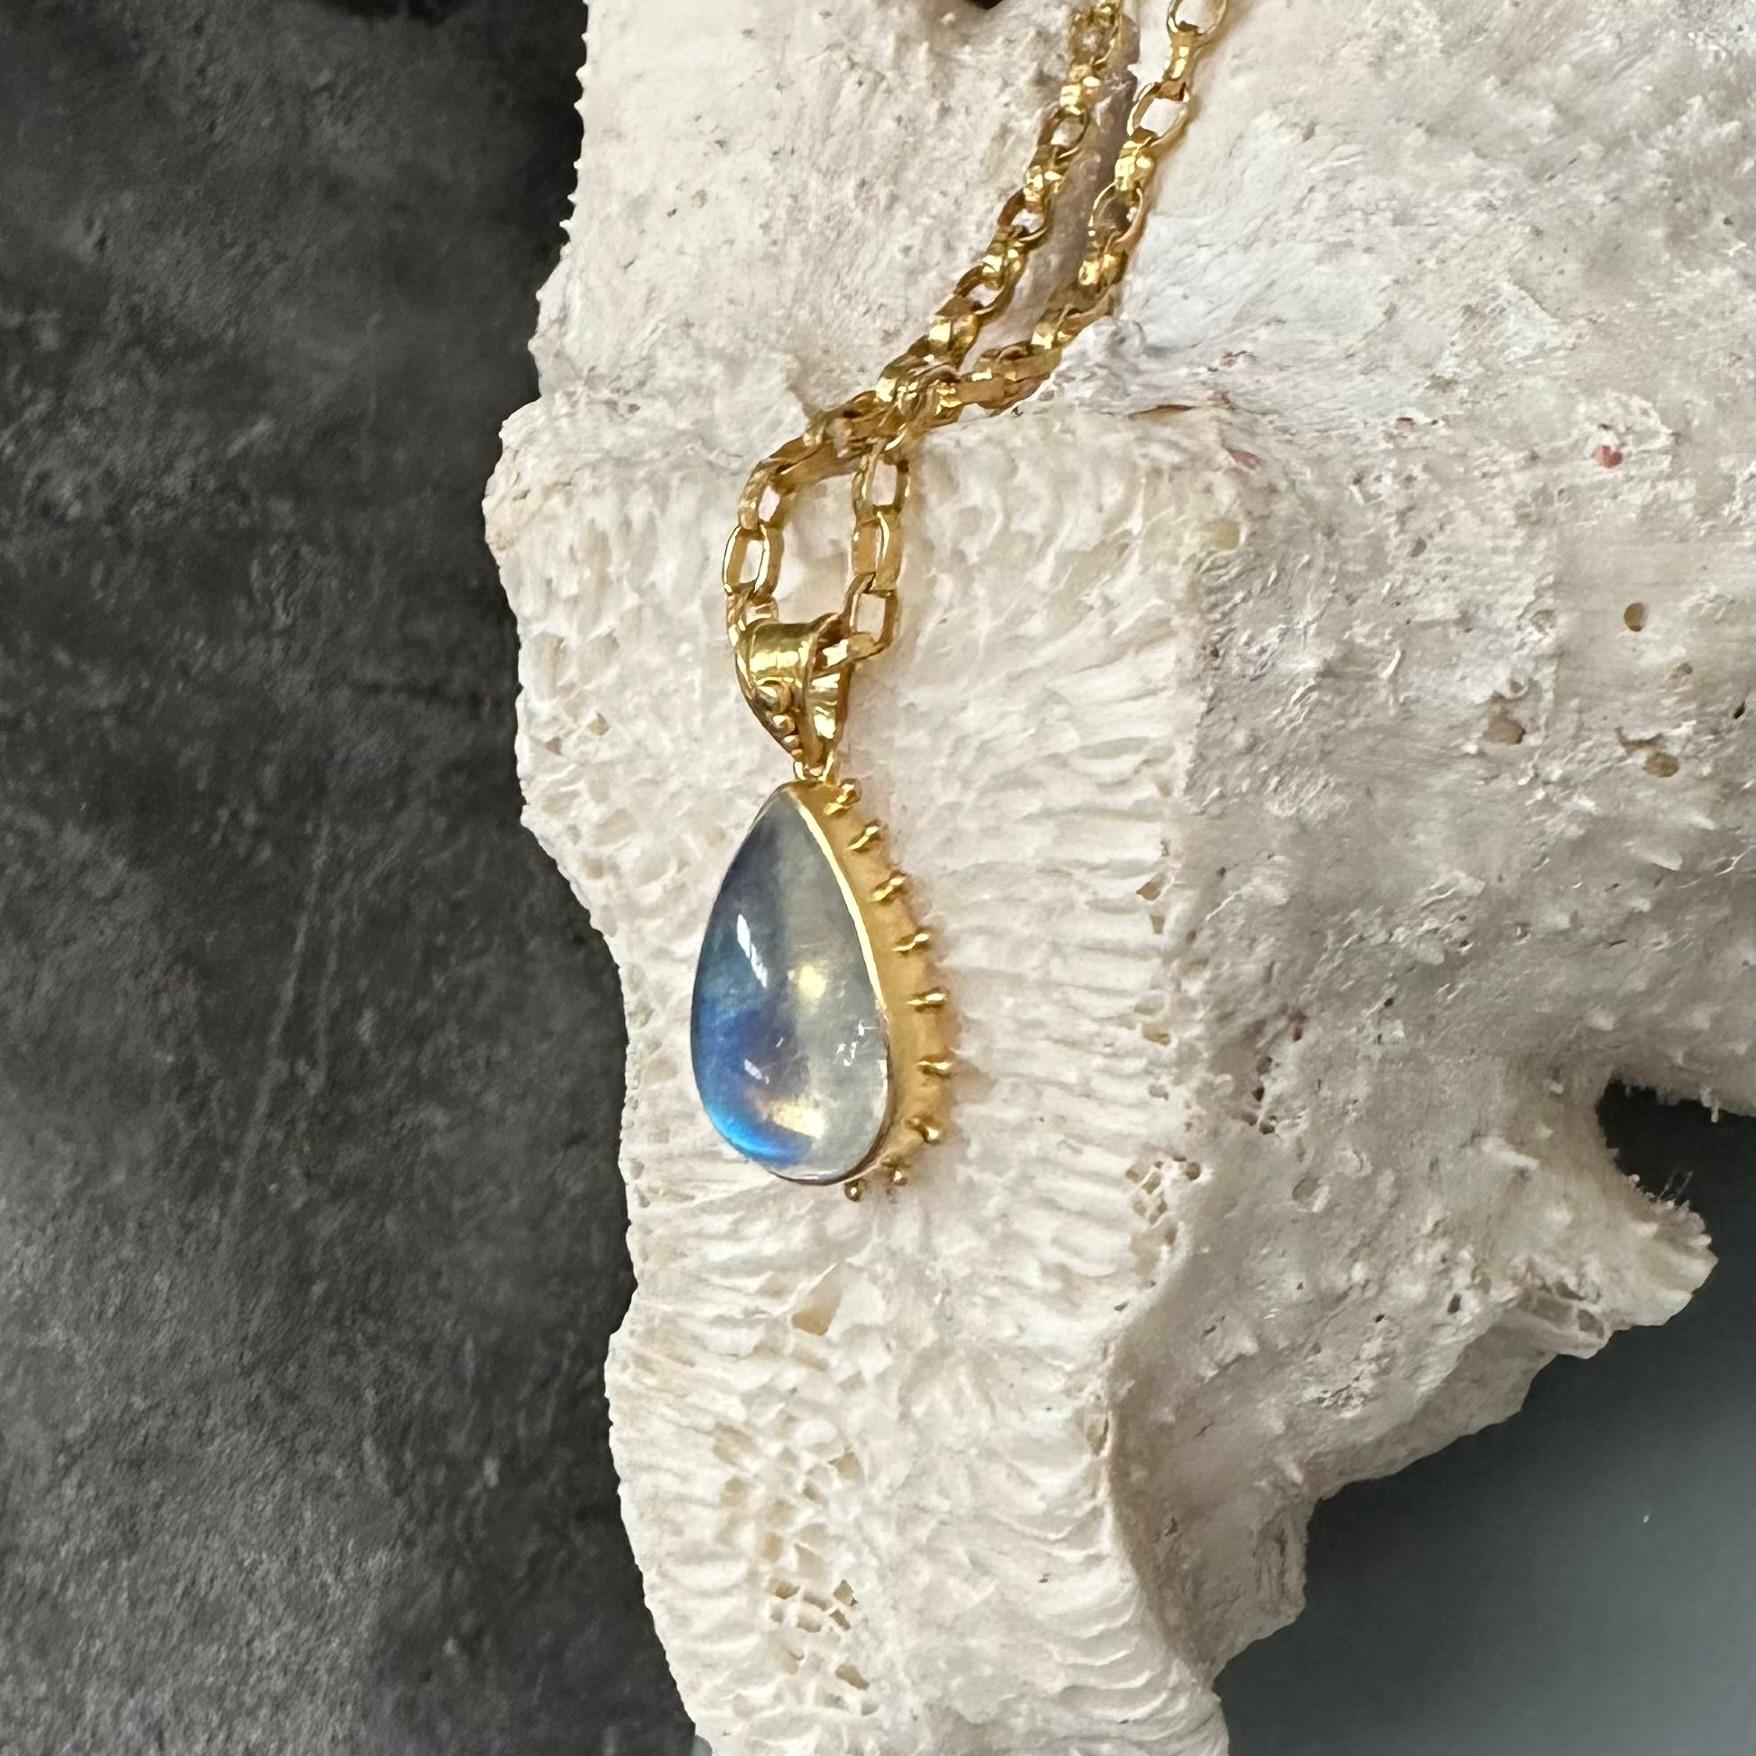 Steven Battelle 10.0 Carat Rainbow Moonstone Cabochon 18k Gold Pendant In New Condition For Sale In Soquel, CA